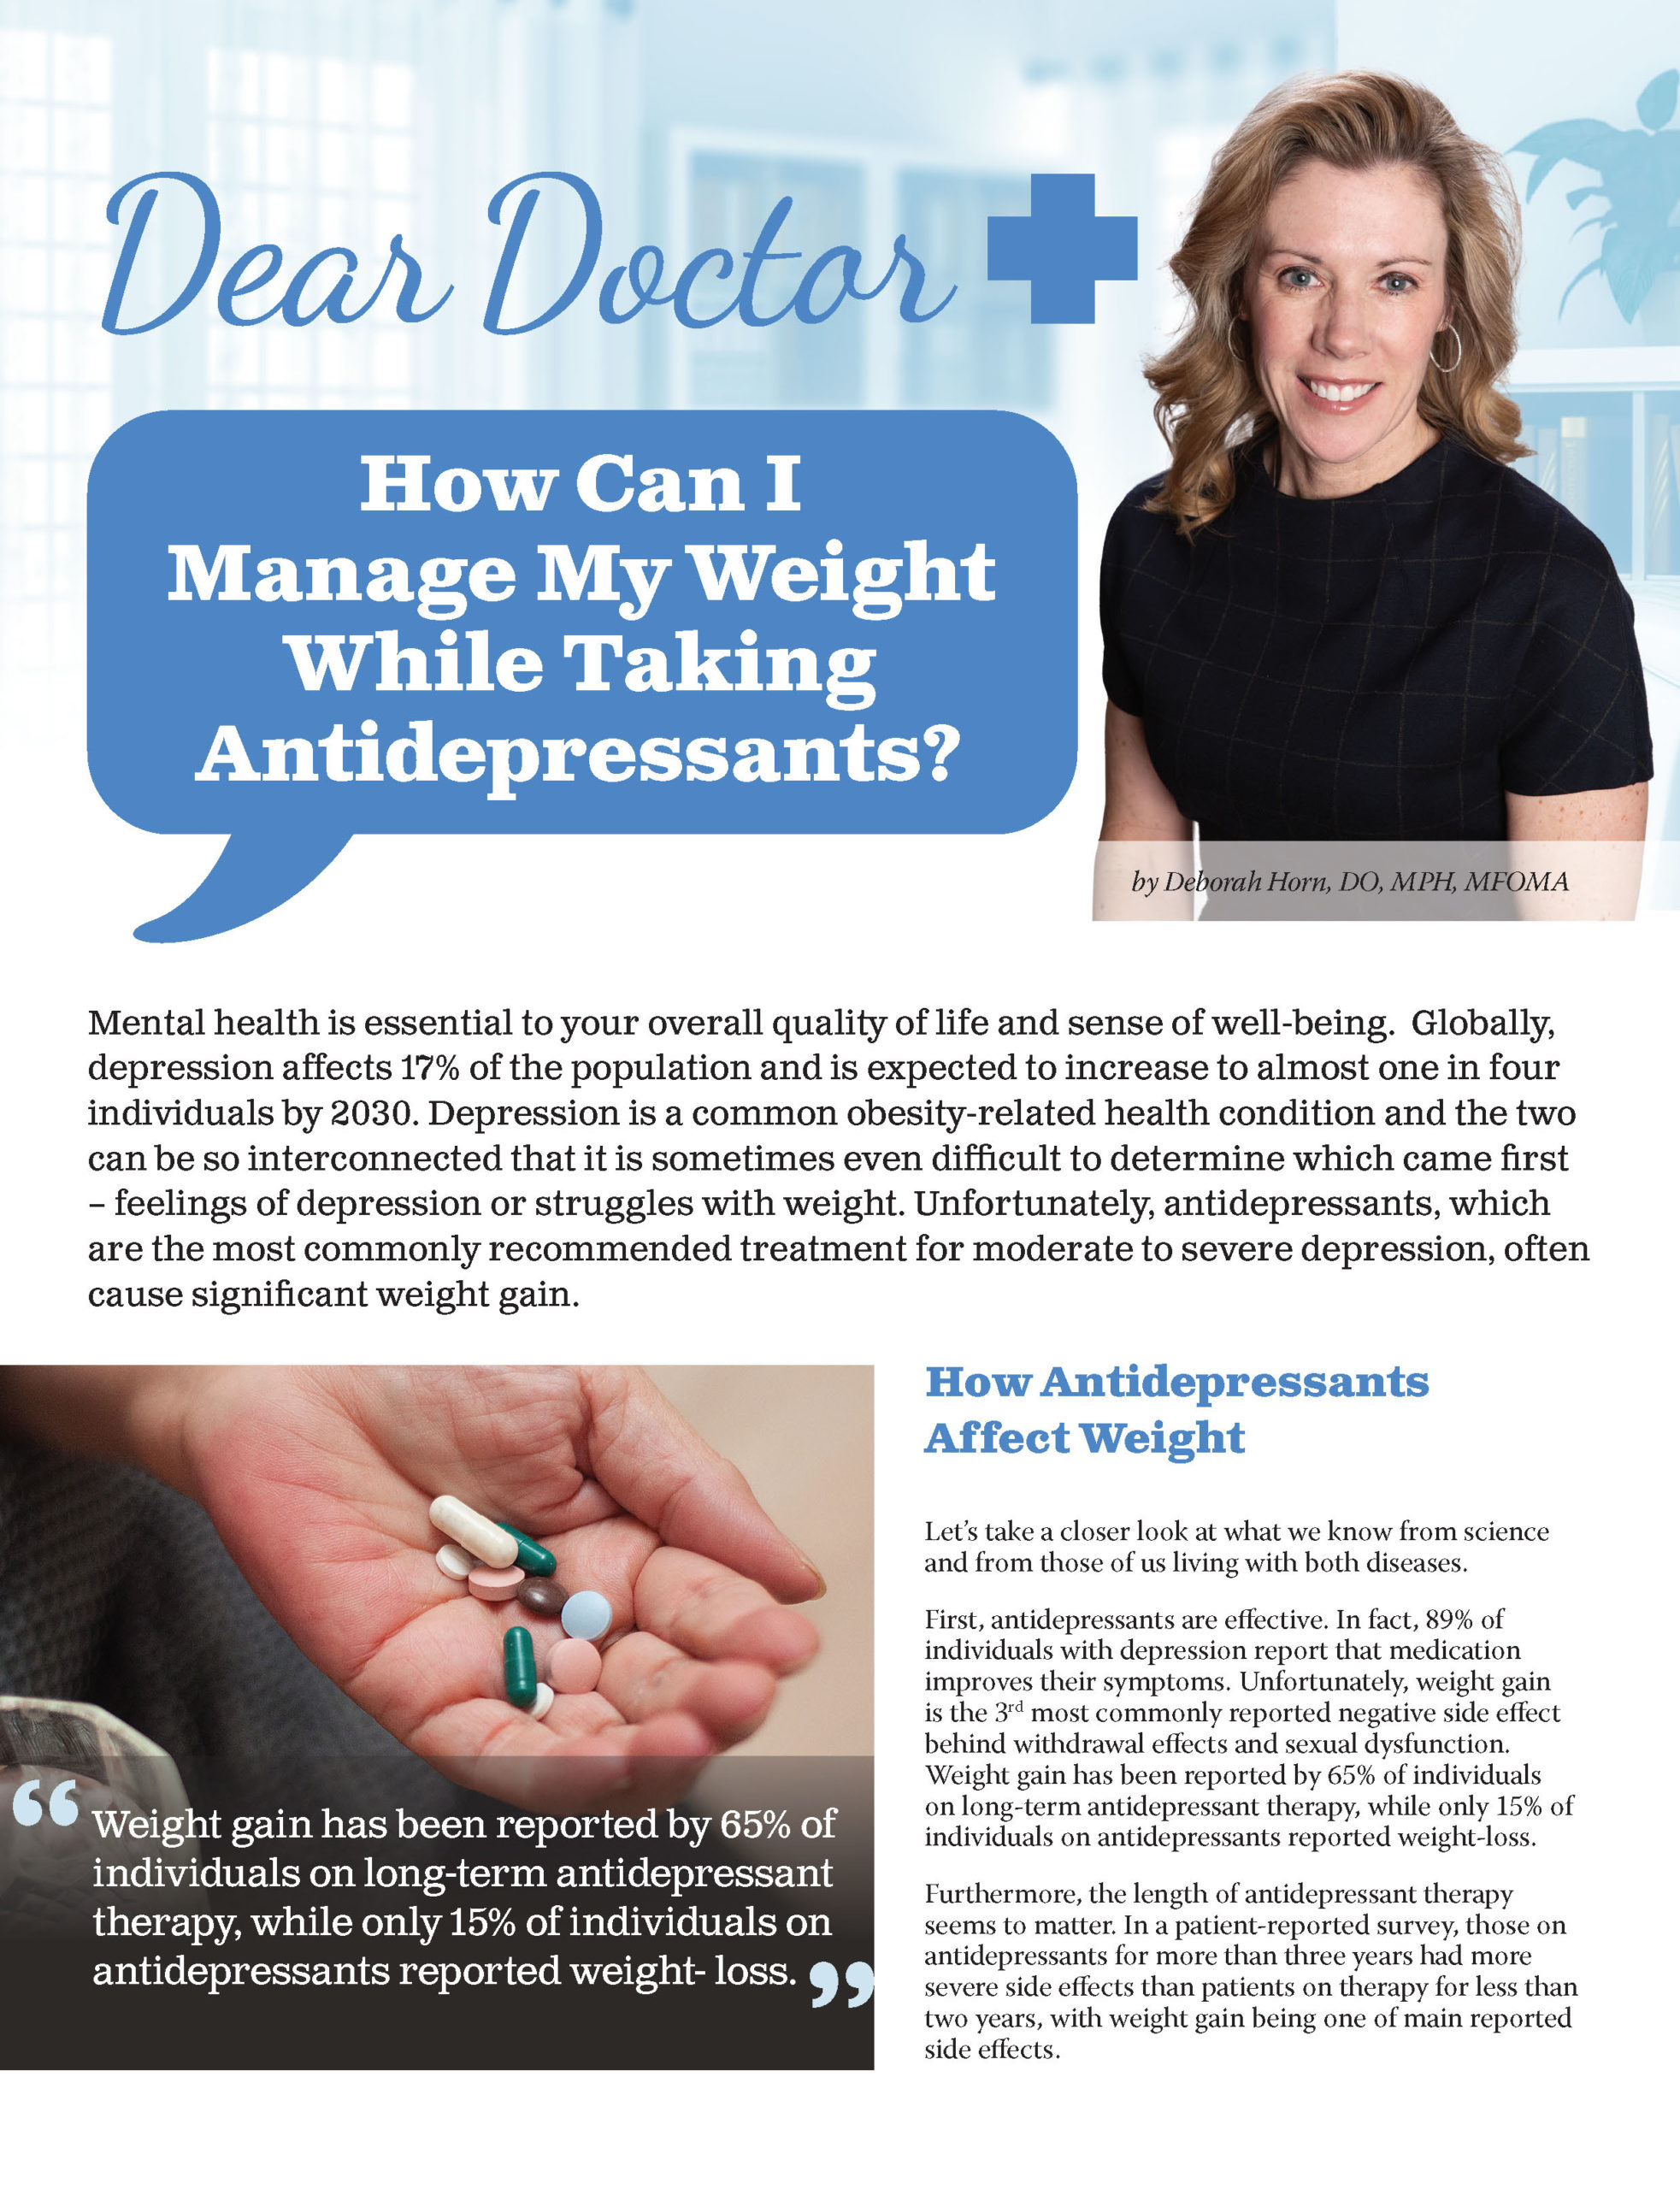 Dear Doctor How Can I Manage My Weight While Taking Antidepressants Obesity Action Coalition